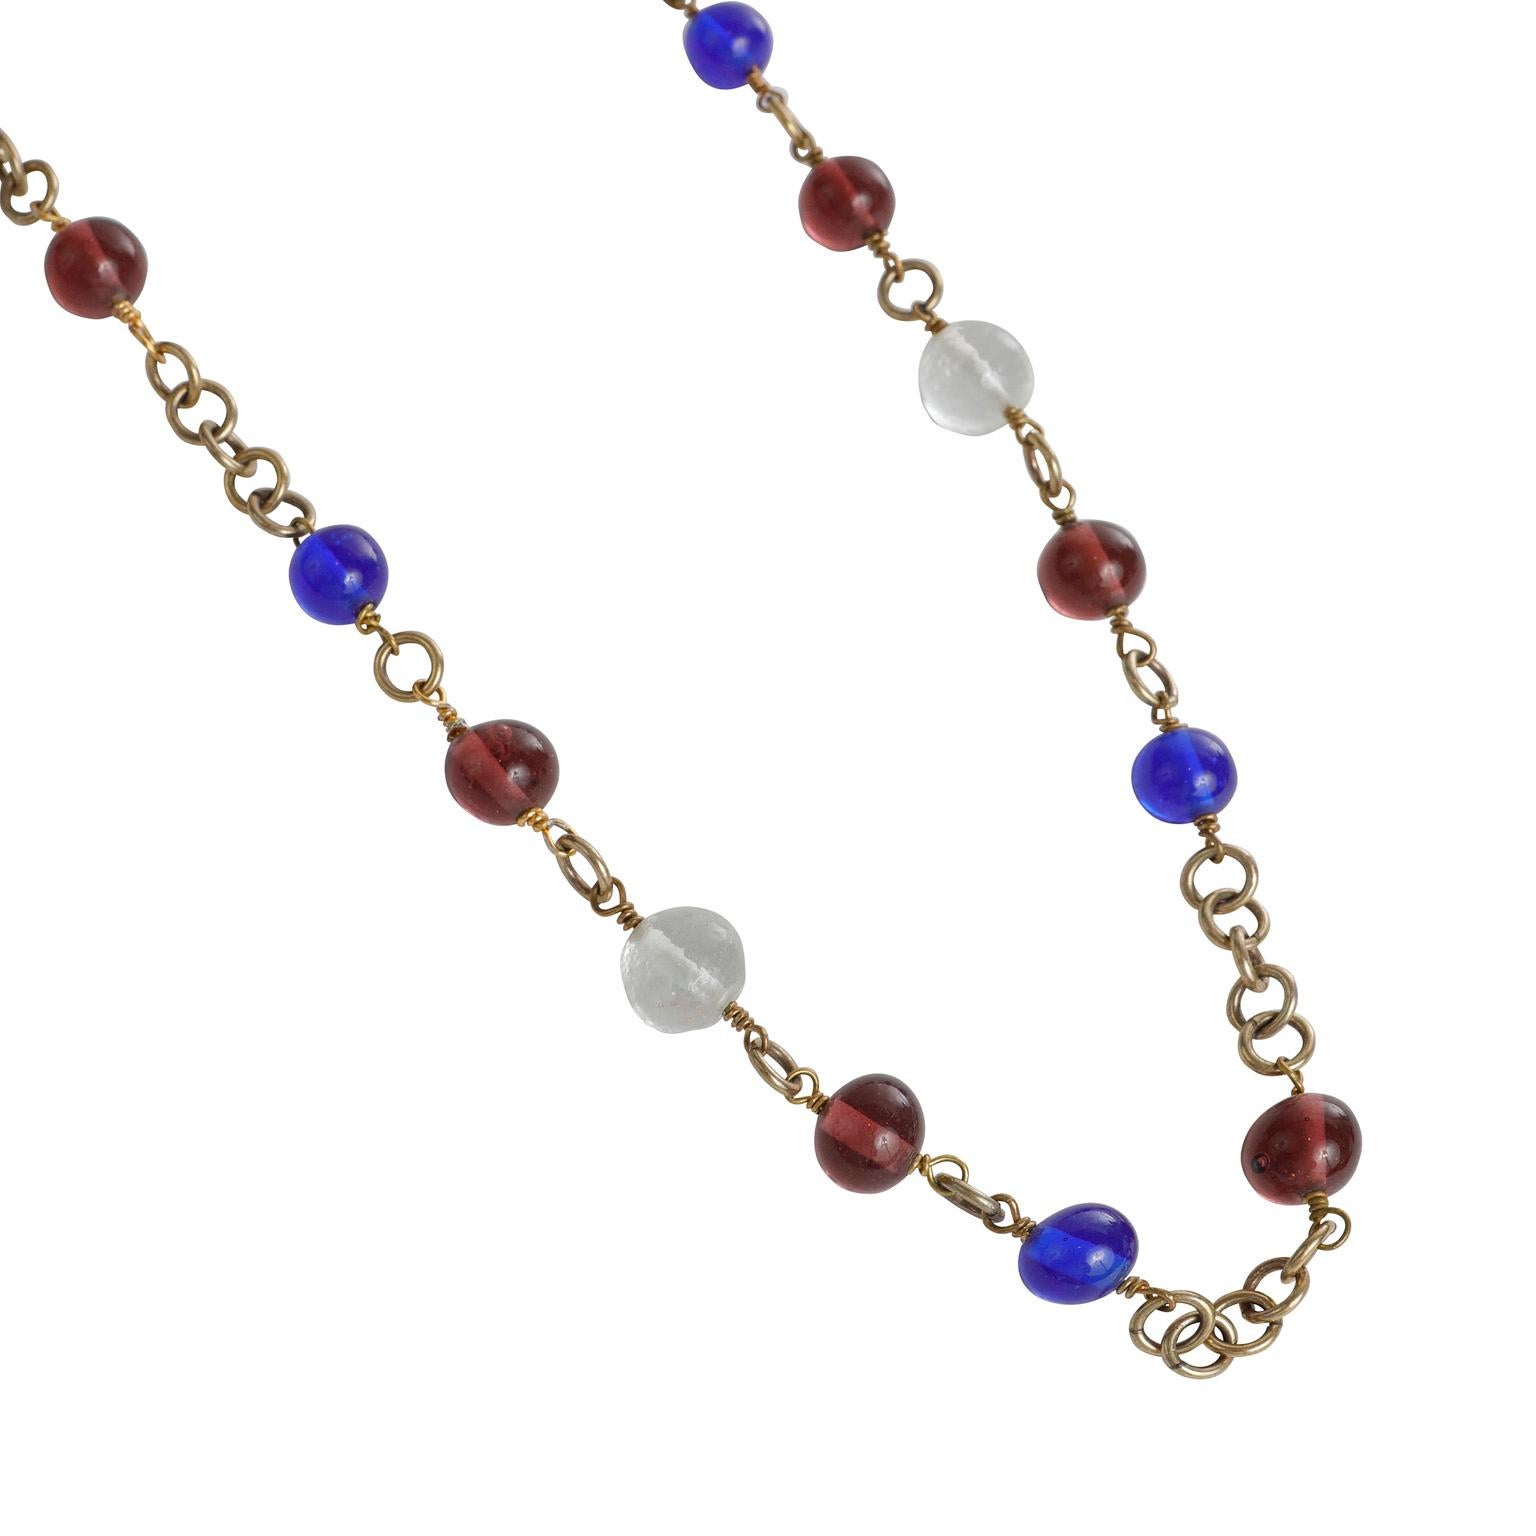 Women's Chanel Vintage Purple and Blue Gripoix Beaded Necklace For Sale